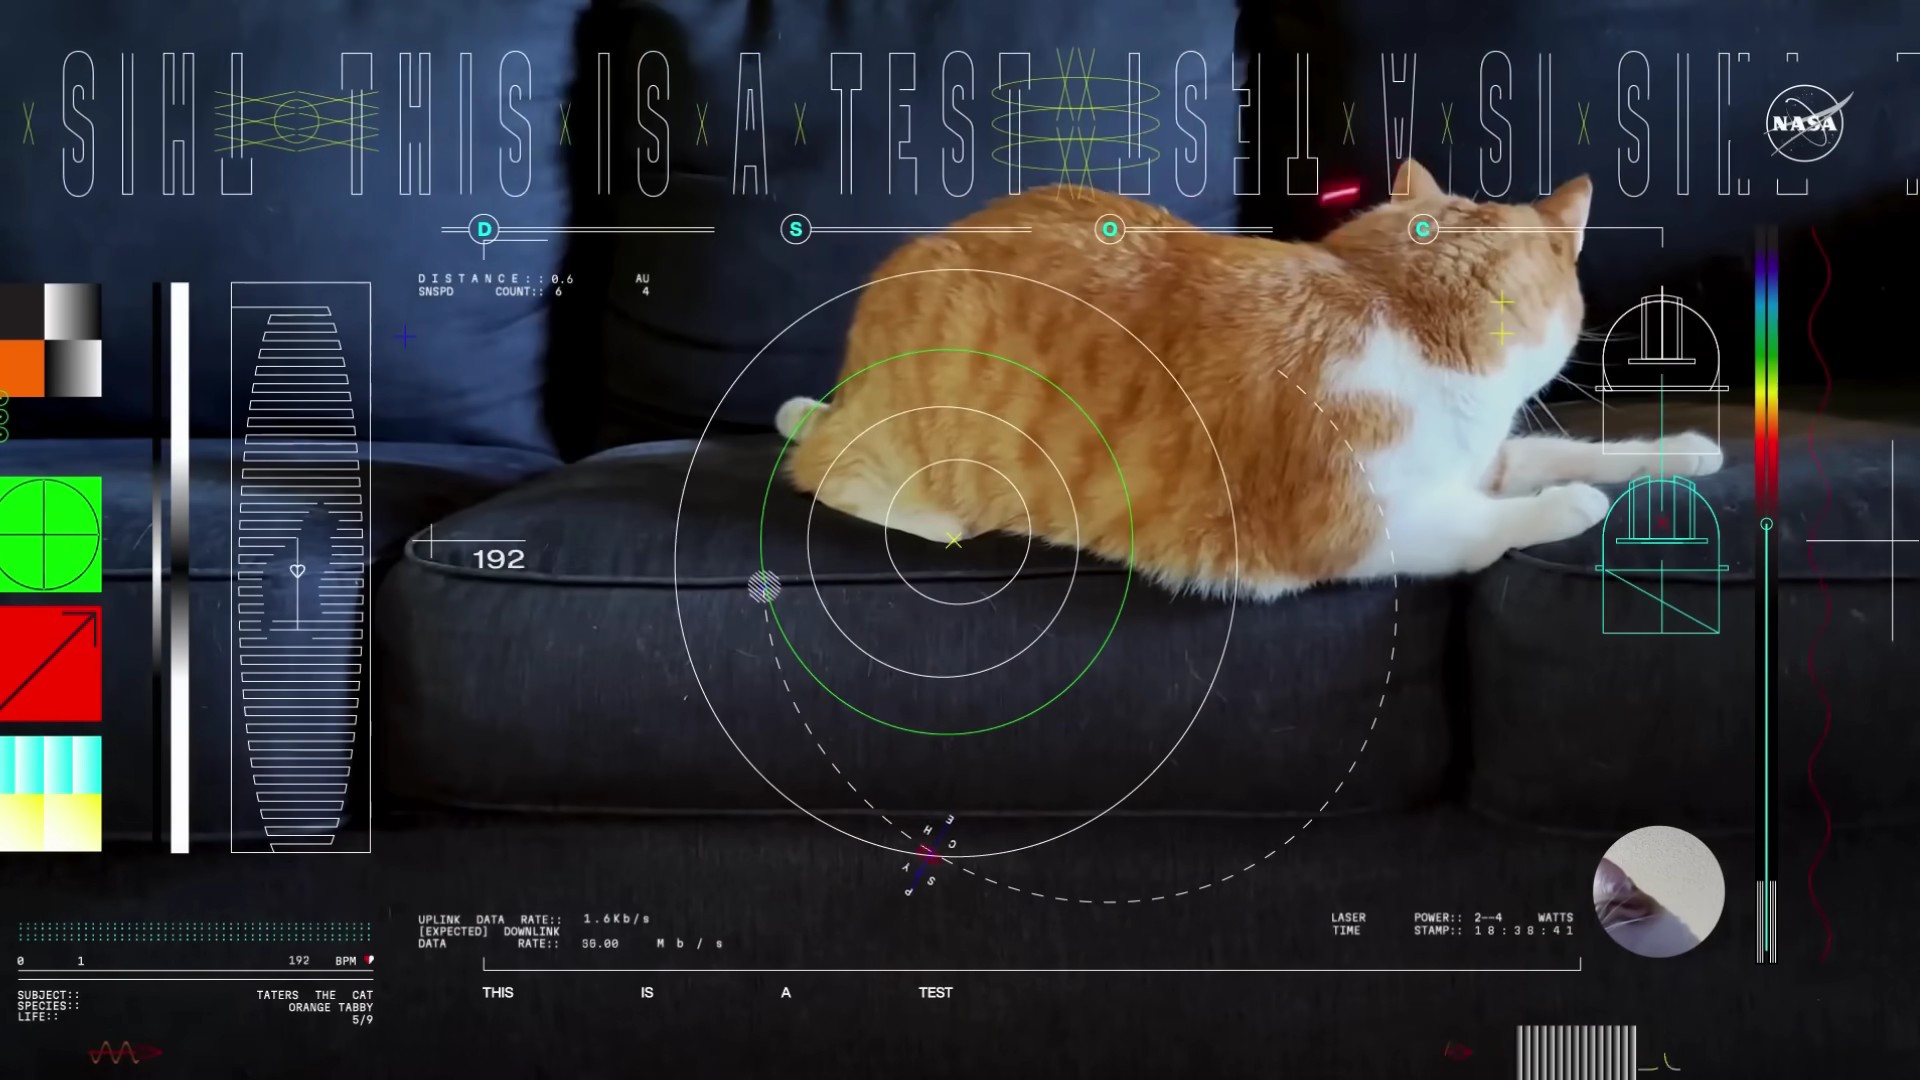 High-Resolution Cat Video Transmitted by NASA from Deep Space to Earth; Take a Look